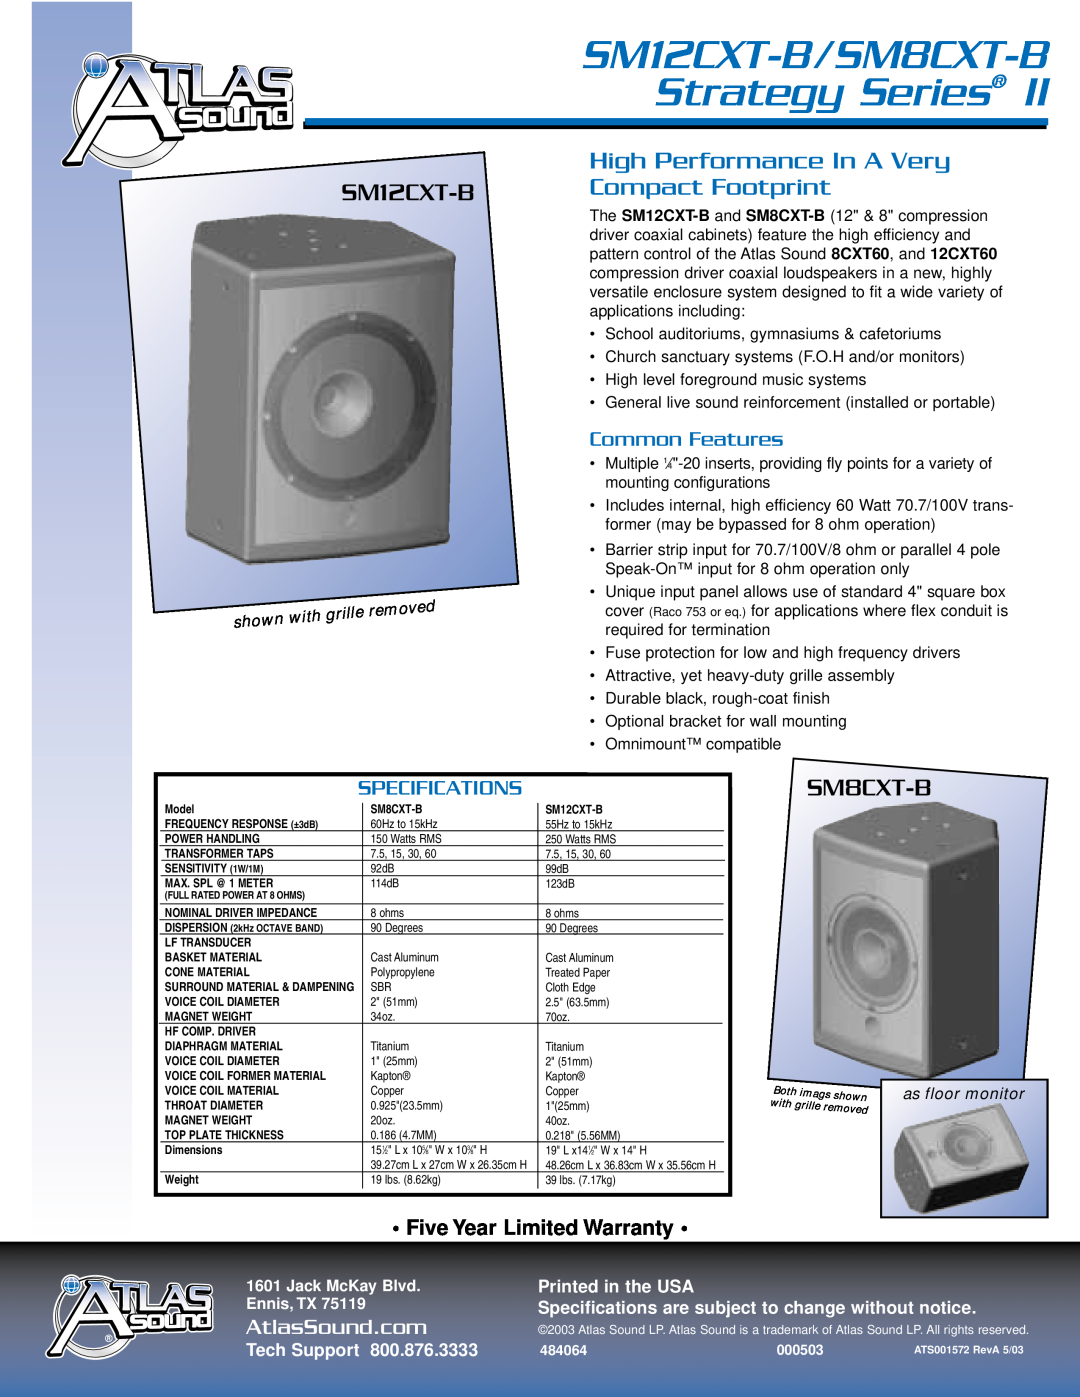 Atlas Sound specifications SM12CXT-B / SM8CXT-B Strategy Series, High Performance In A Very Compact Footprint, shown 